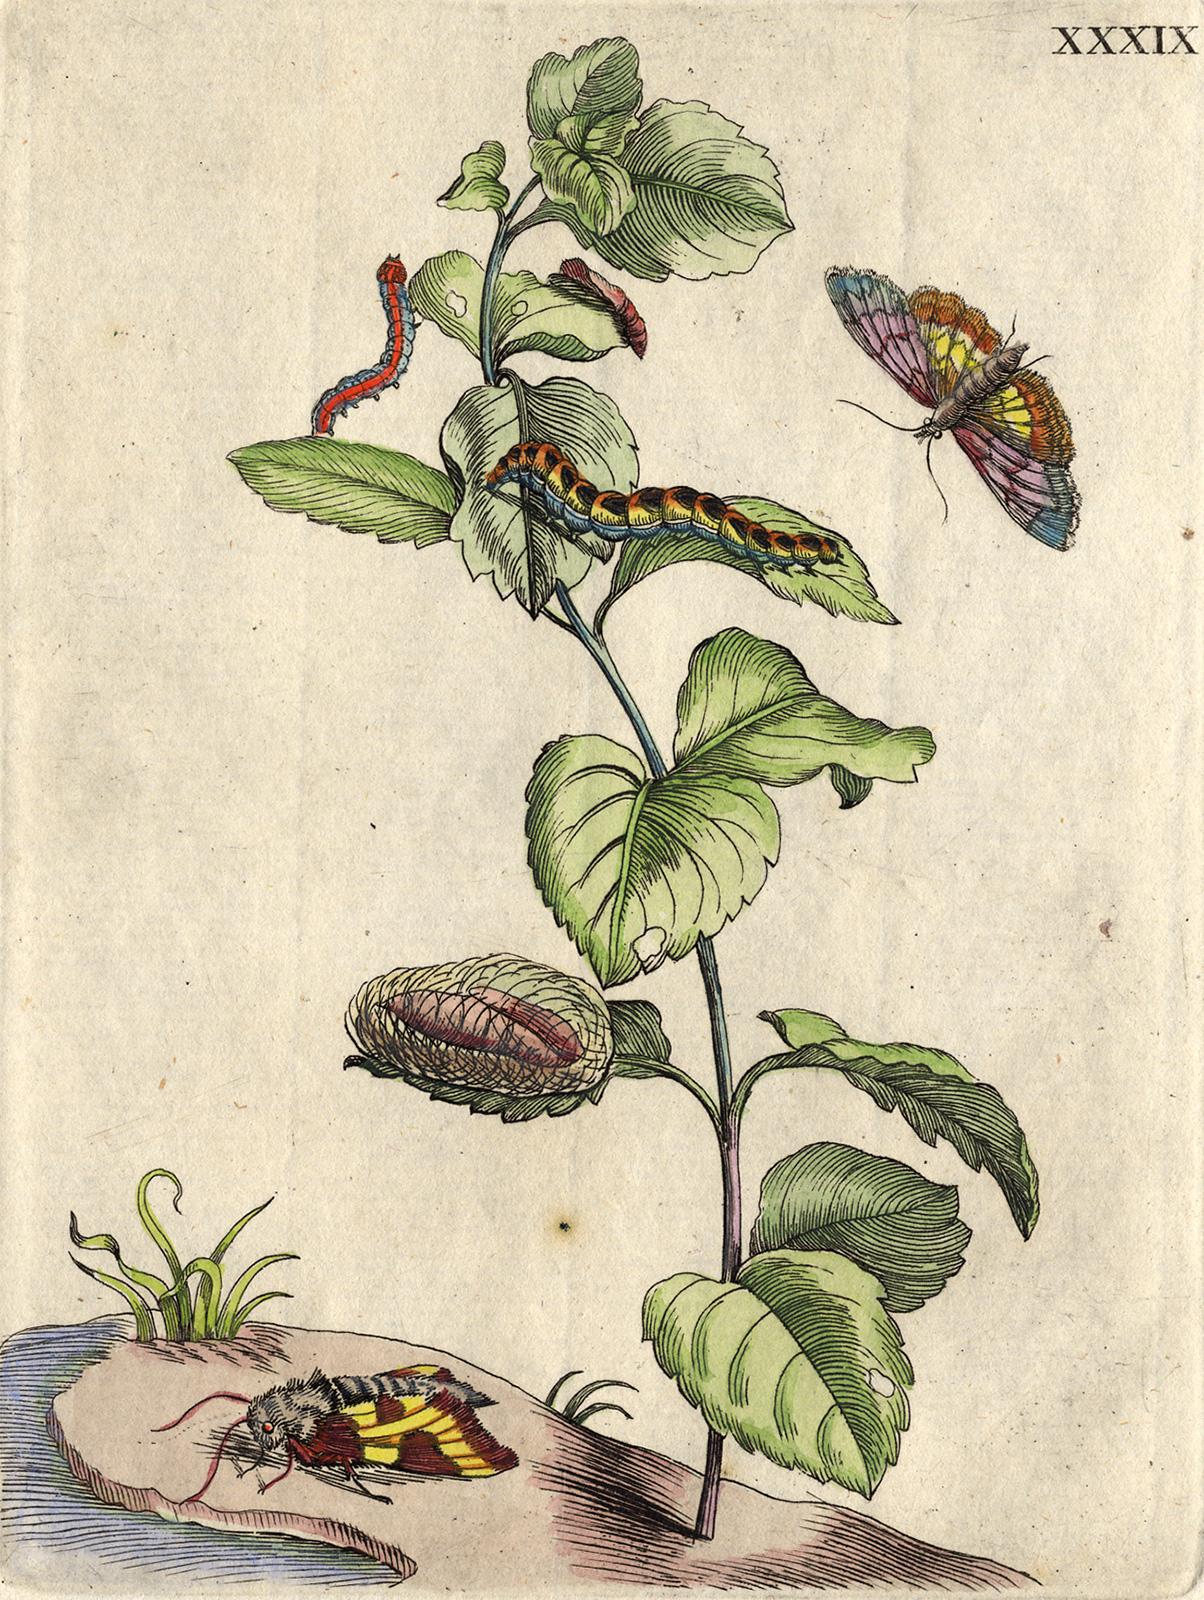 Mint with insects by Merian - Handcoloured engraving - 18th century - Print by Maria Sybilla Merian